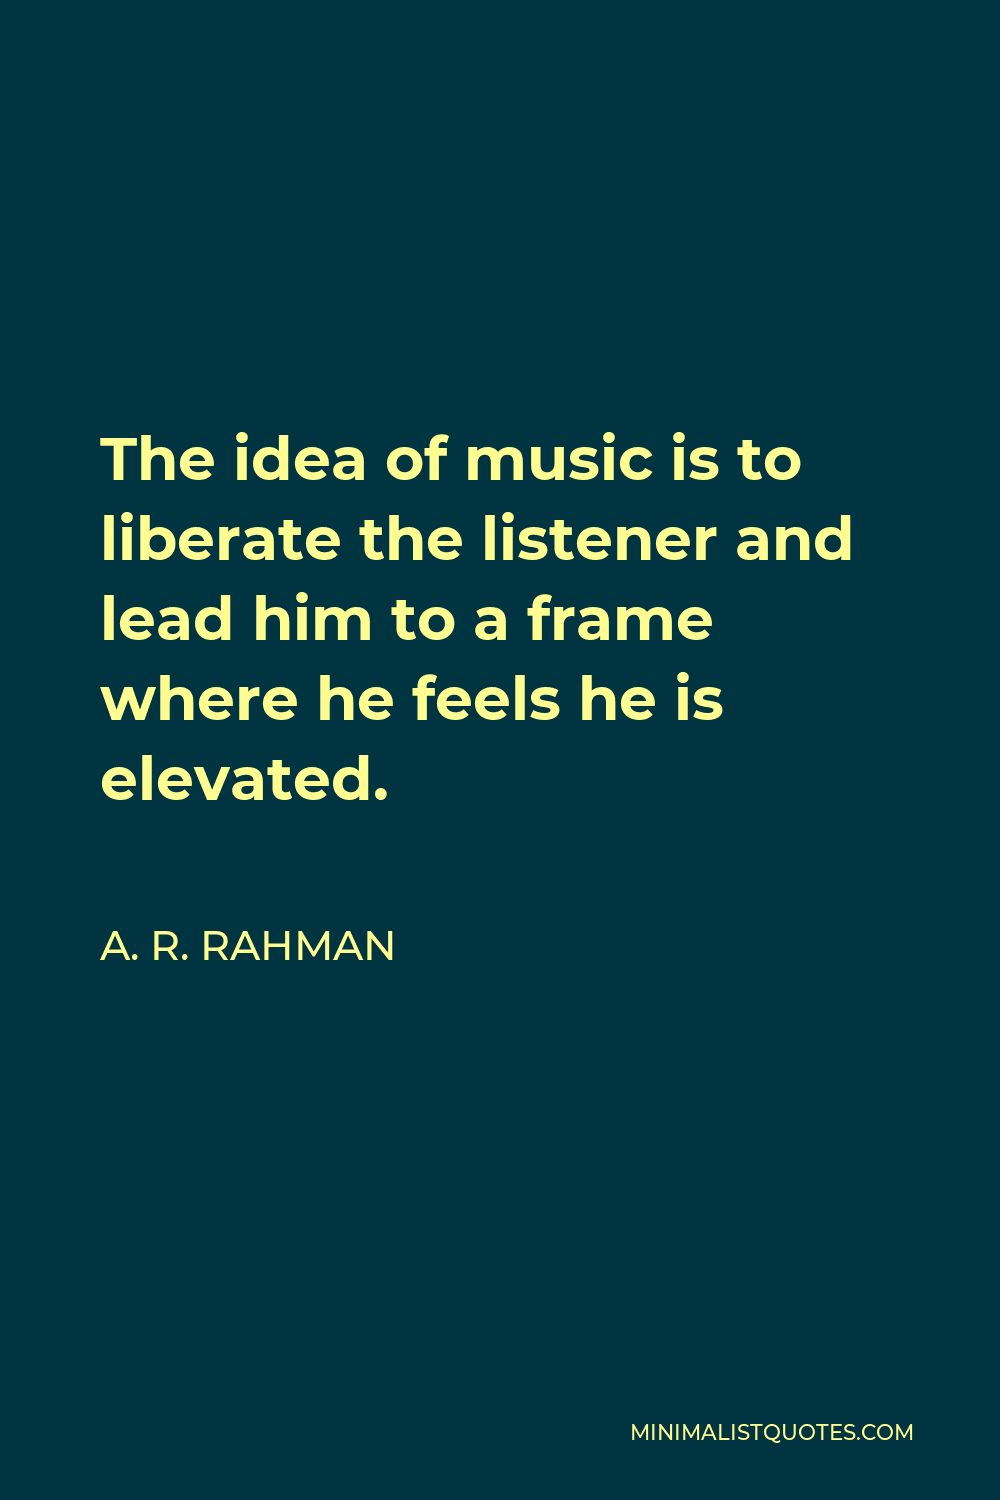 A. R. Rahman Quote - The idea of music is to liberate the listener and lead him to a frame where he feels he is elevated.